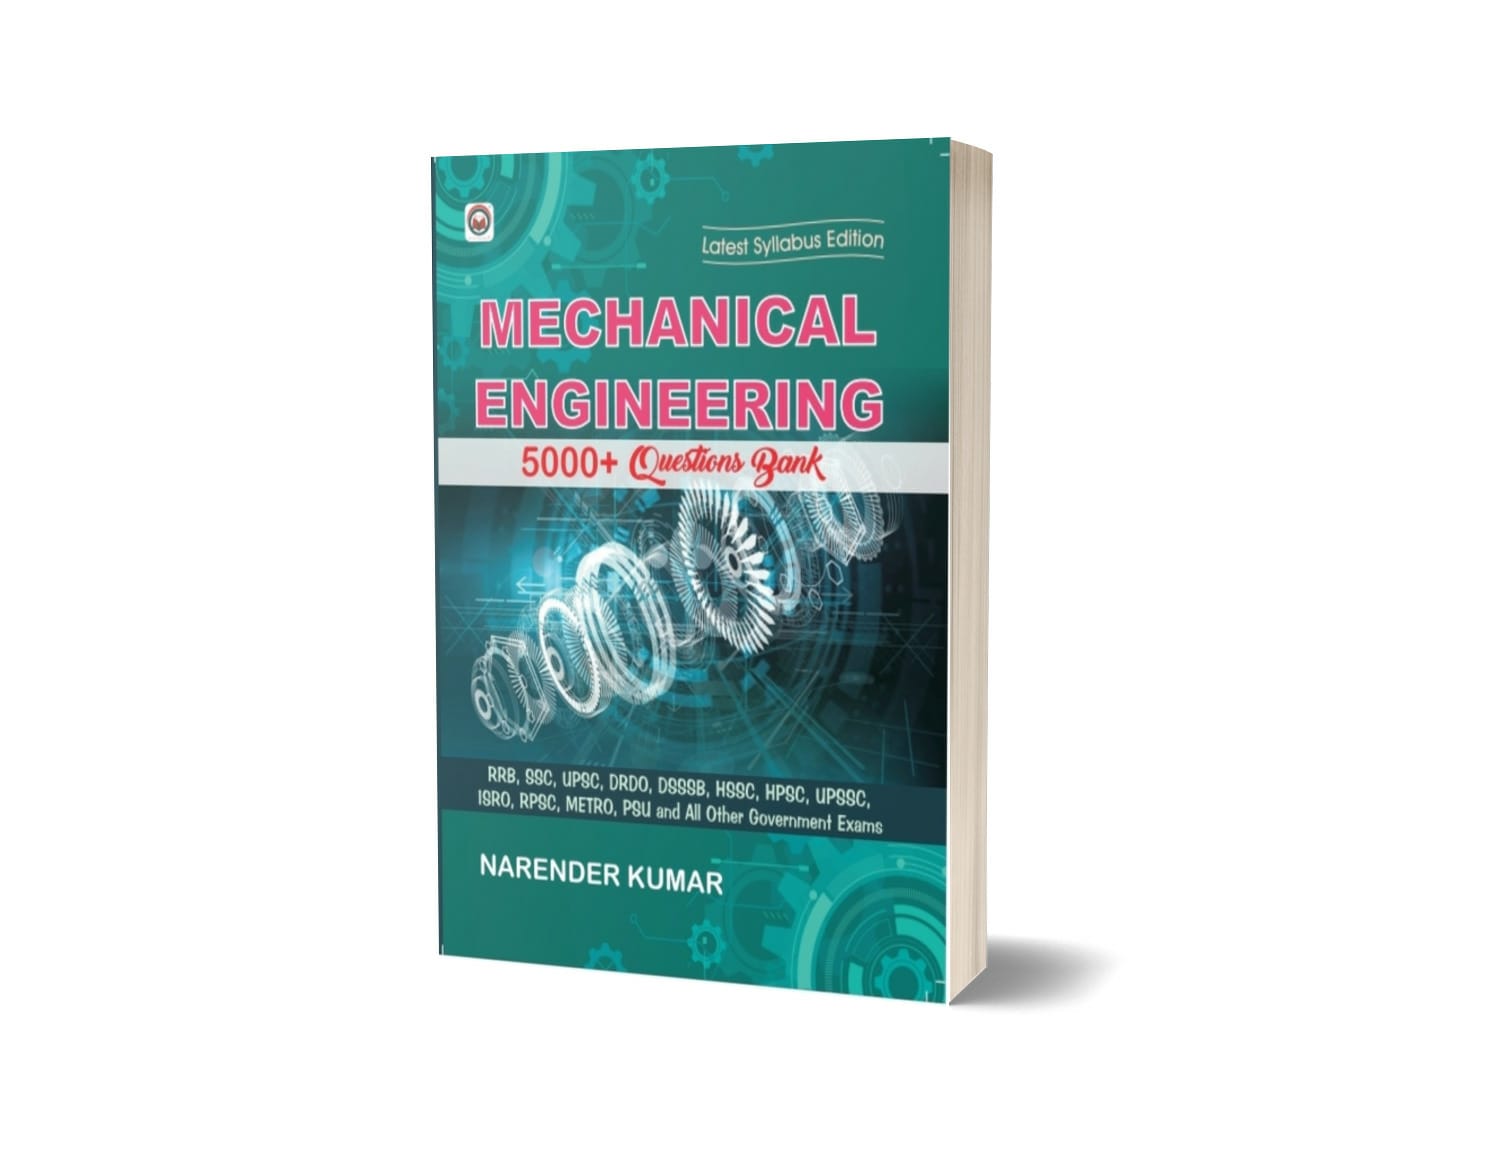 Mechanical Engineeing 5000+ Questions Bank